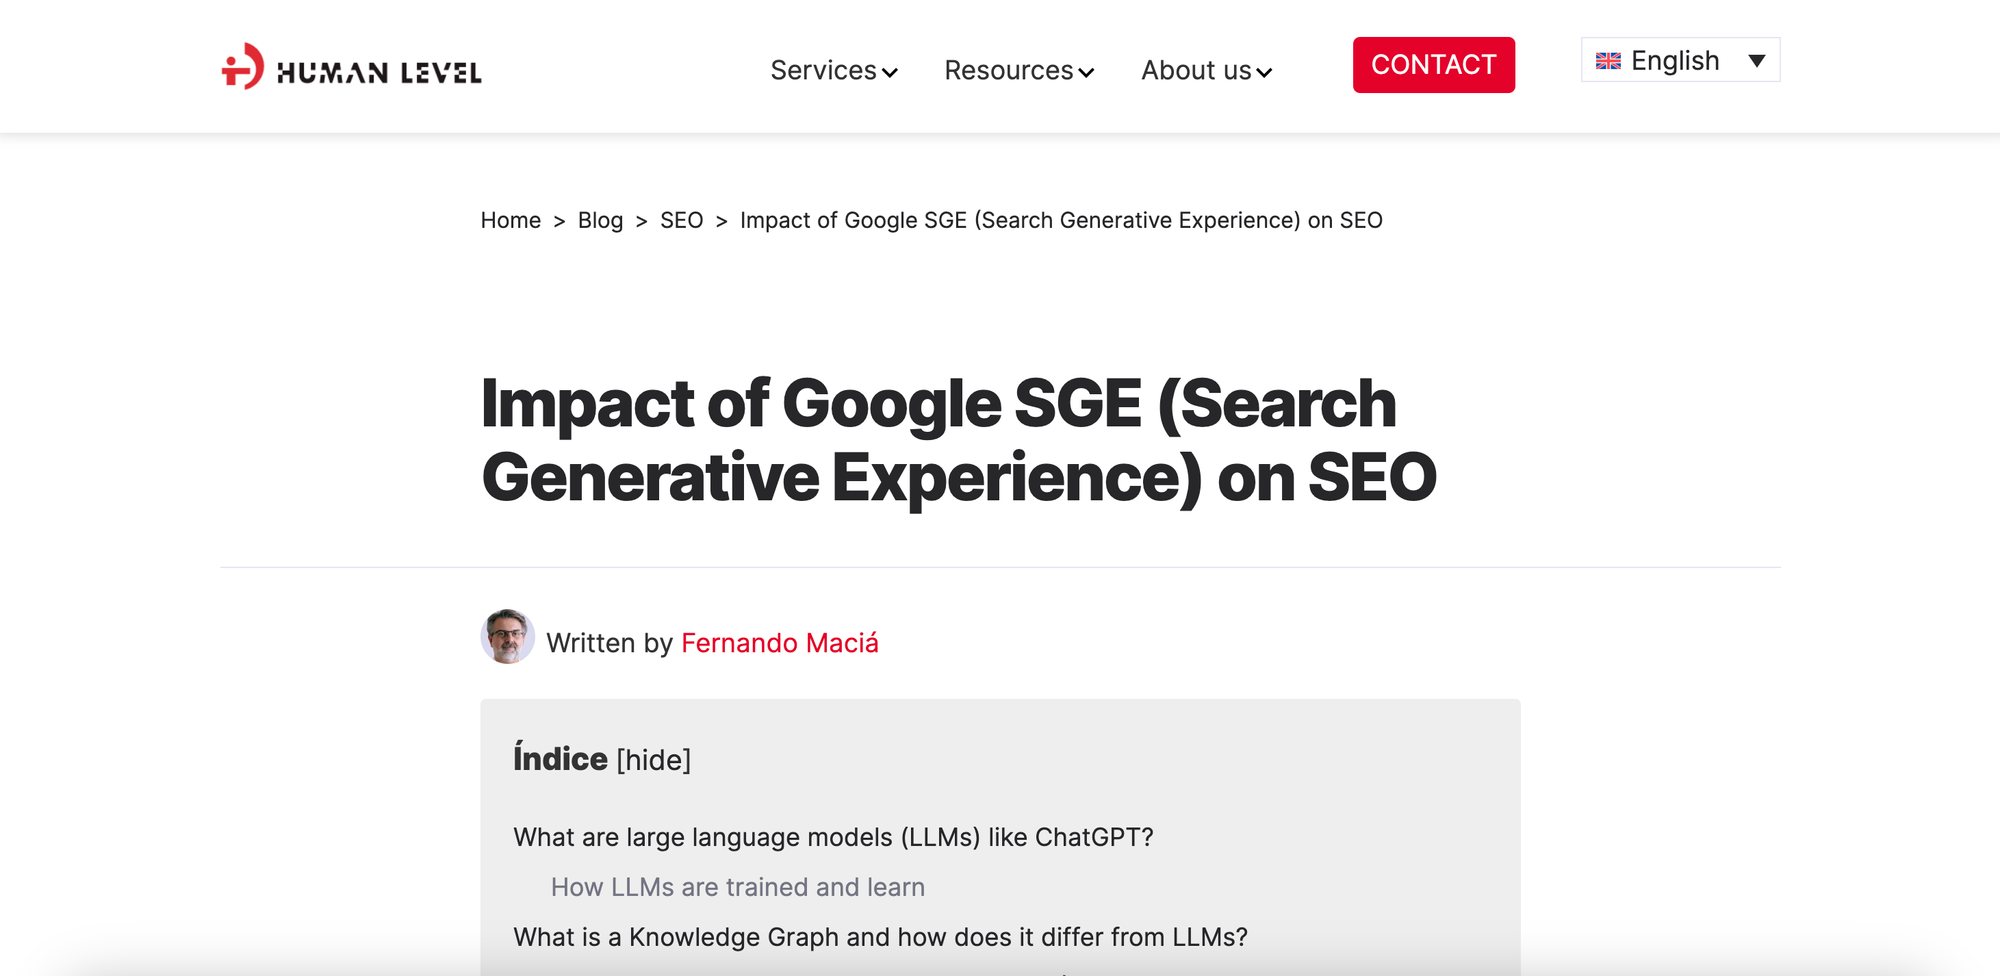 What marketers need to know about Google’s Gemini